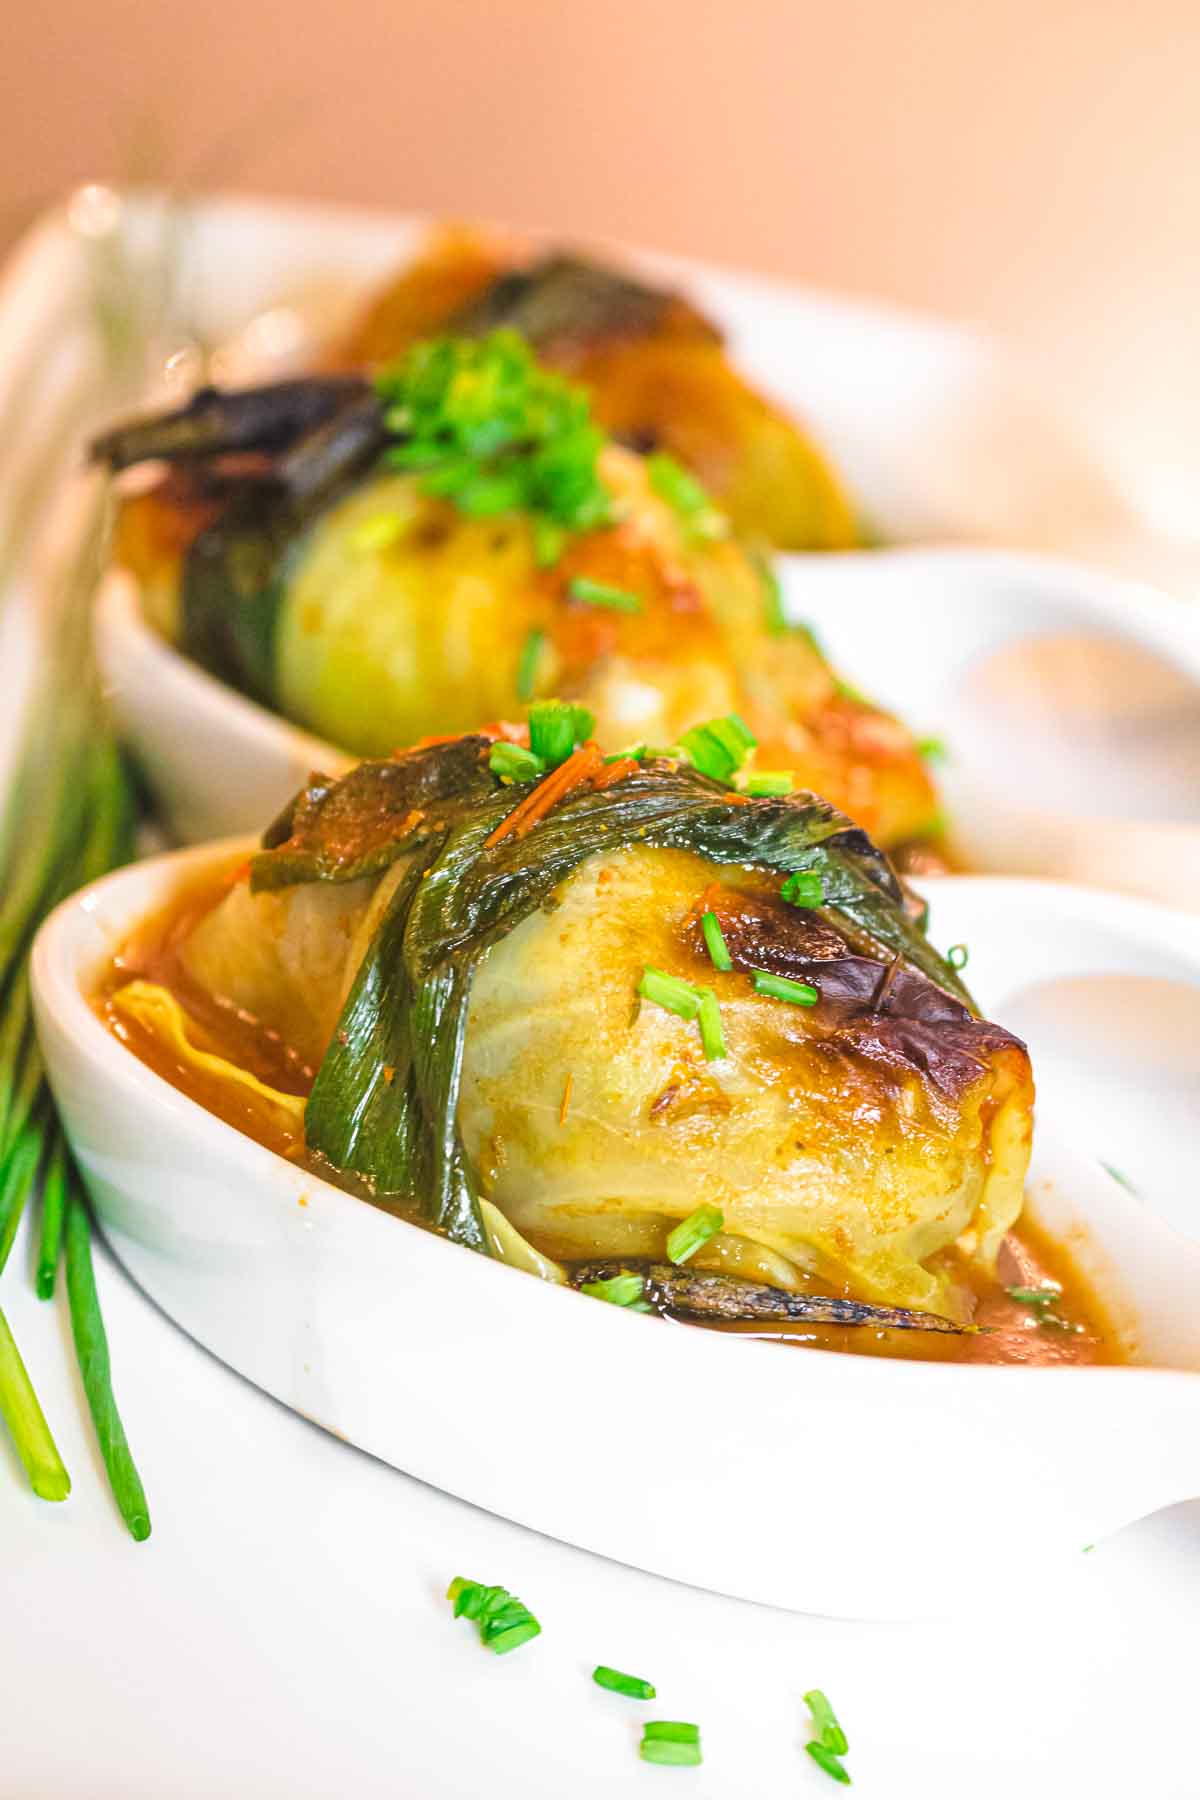 Stuffed cabbage with scallion and chives on a white plate.